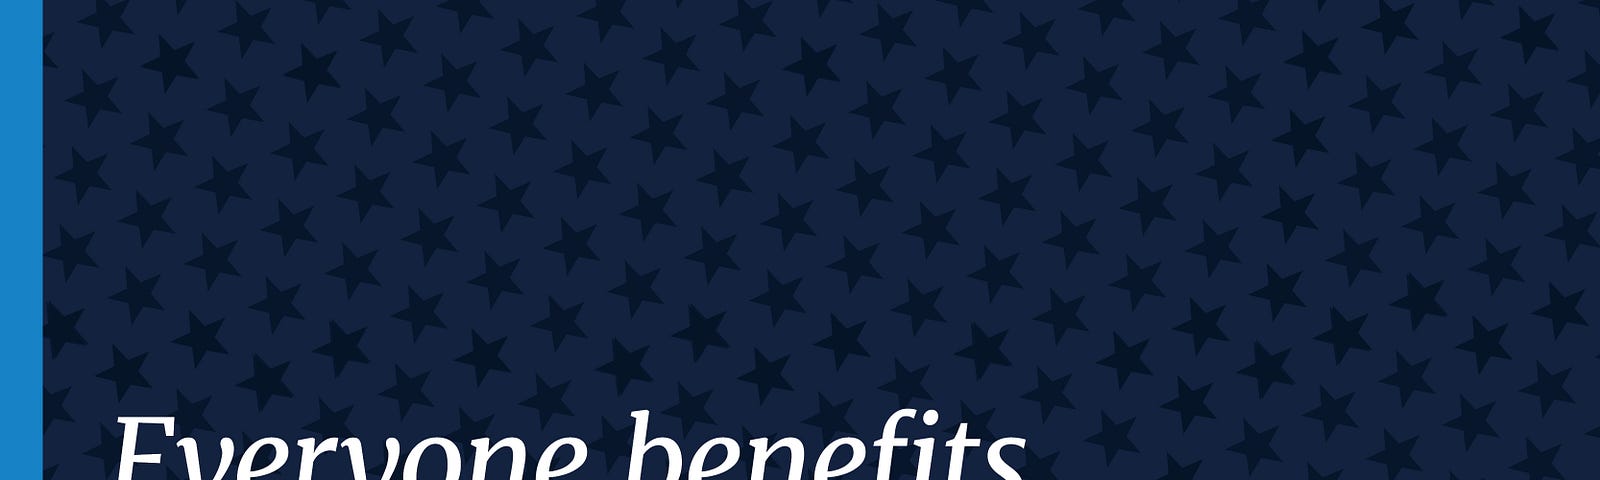 Navy blue stars cover a dark blue background. Text reads “Everyone benefits from inclusive design,” with “everyone benefits from” in white and “inclusive design” in yellow. “Everyone benefits” is italicized. There is a bright blue stripe down the left edge of the image.